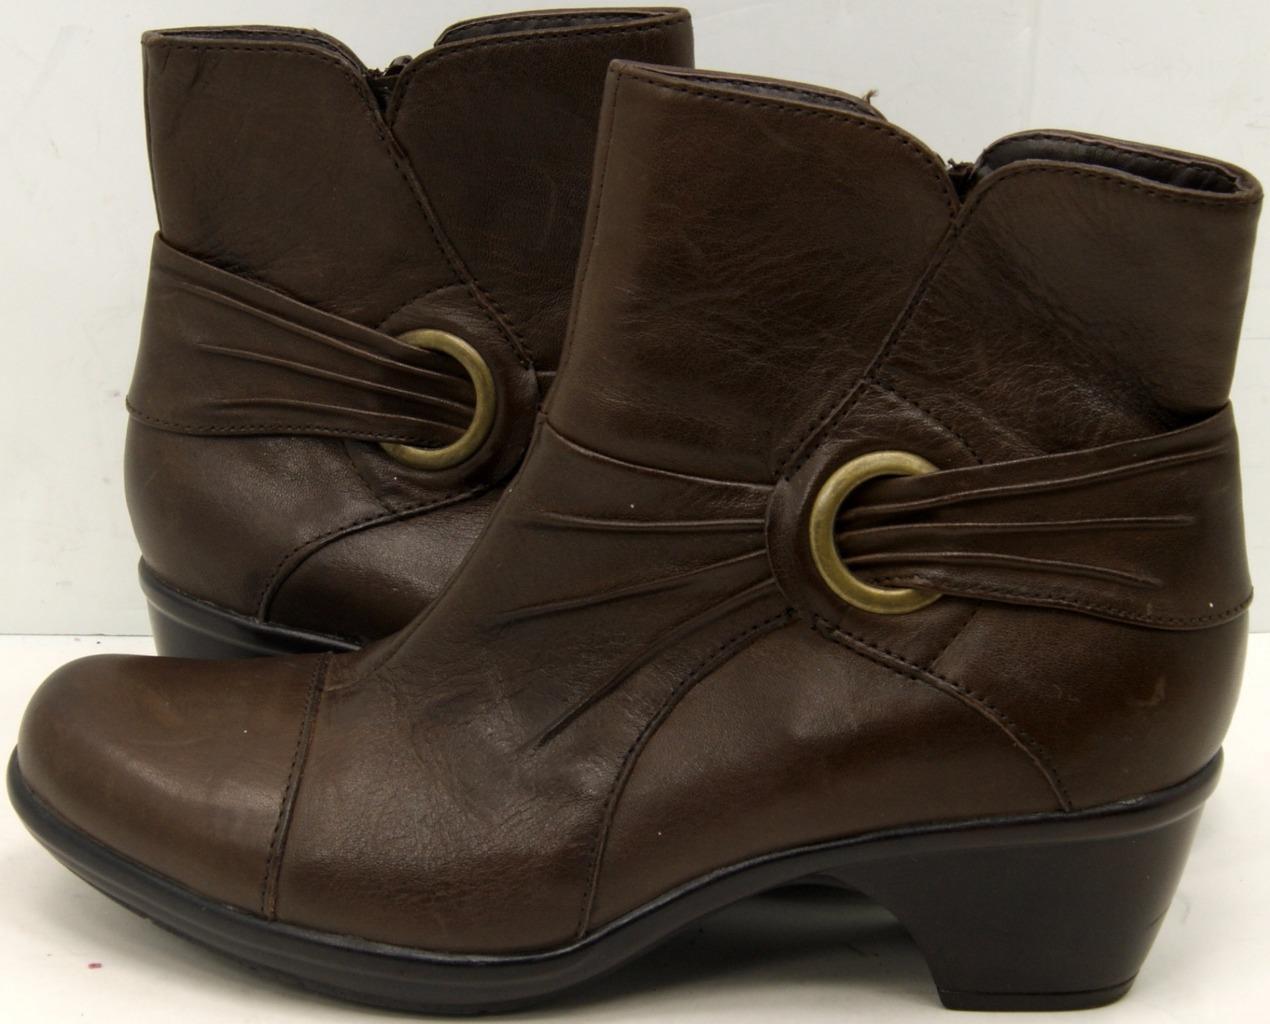 Clarks Bendables Ingalls Rosa Ruched Brown Leather Women's Ankle Boots ...